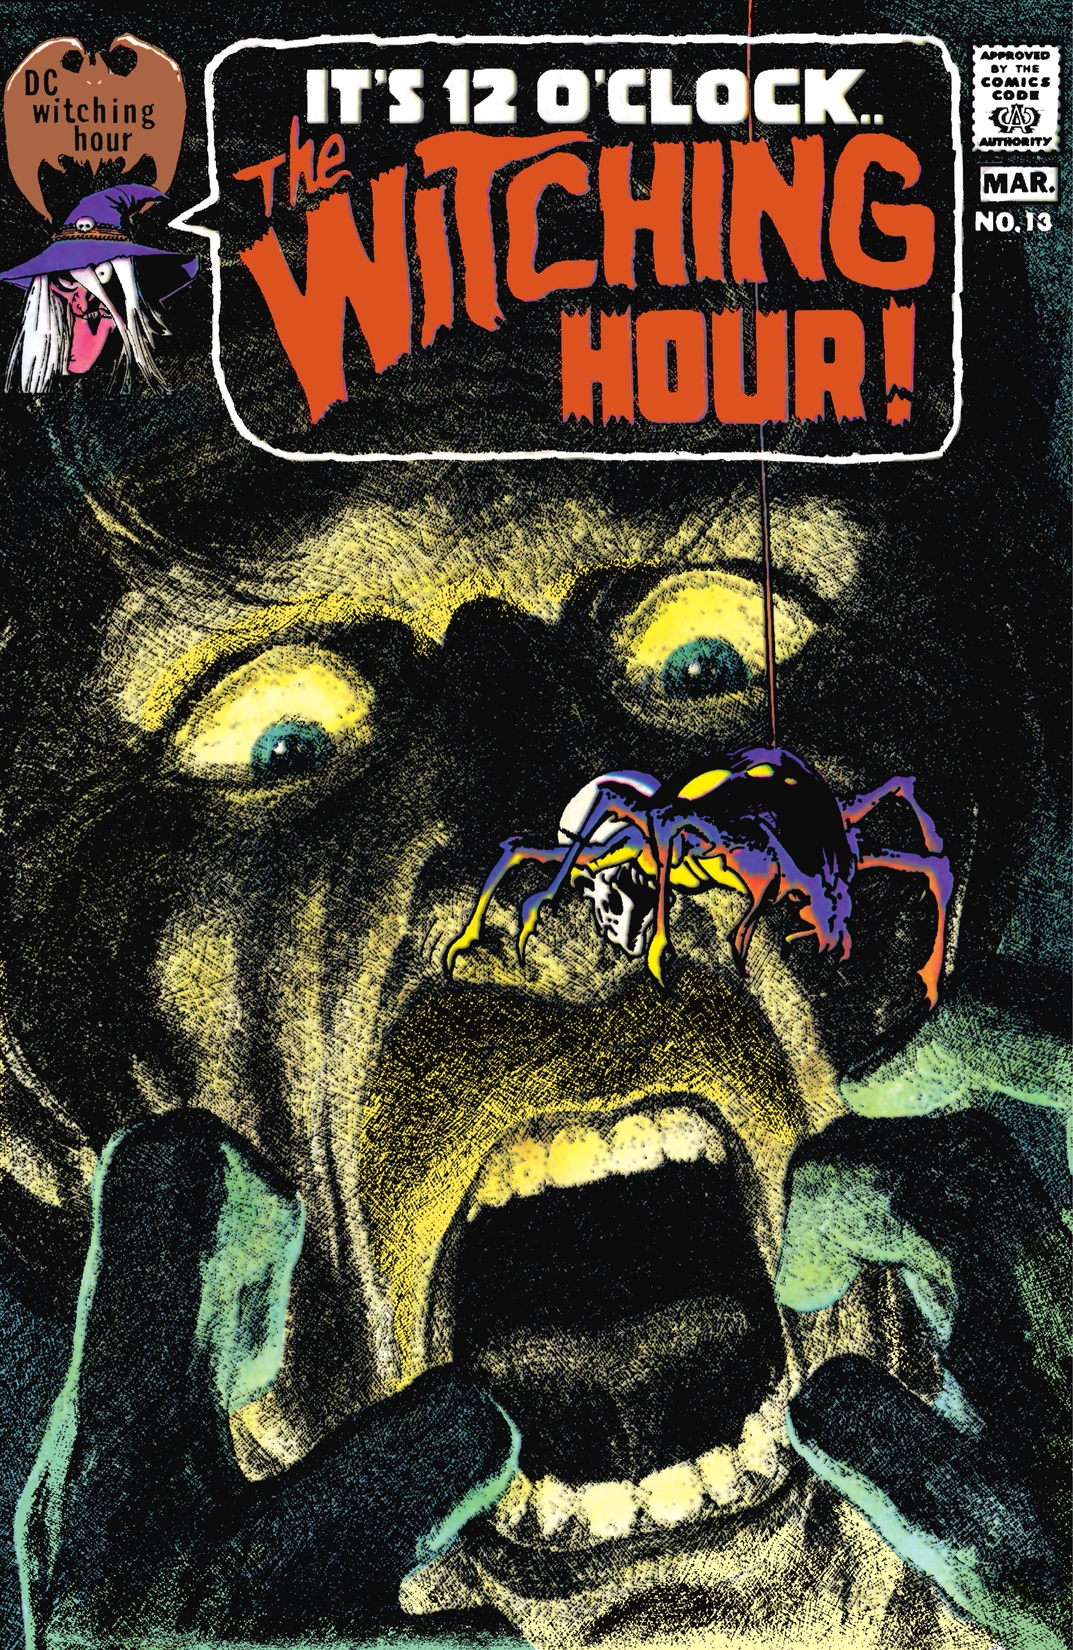 The Witching Hour #13 preview images